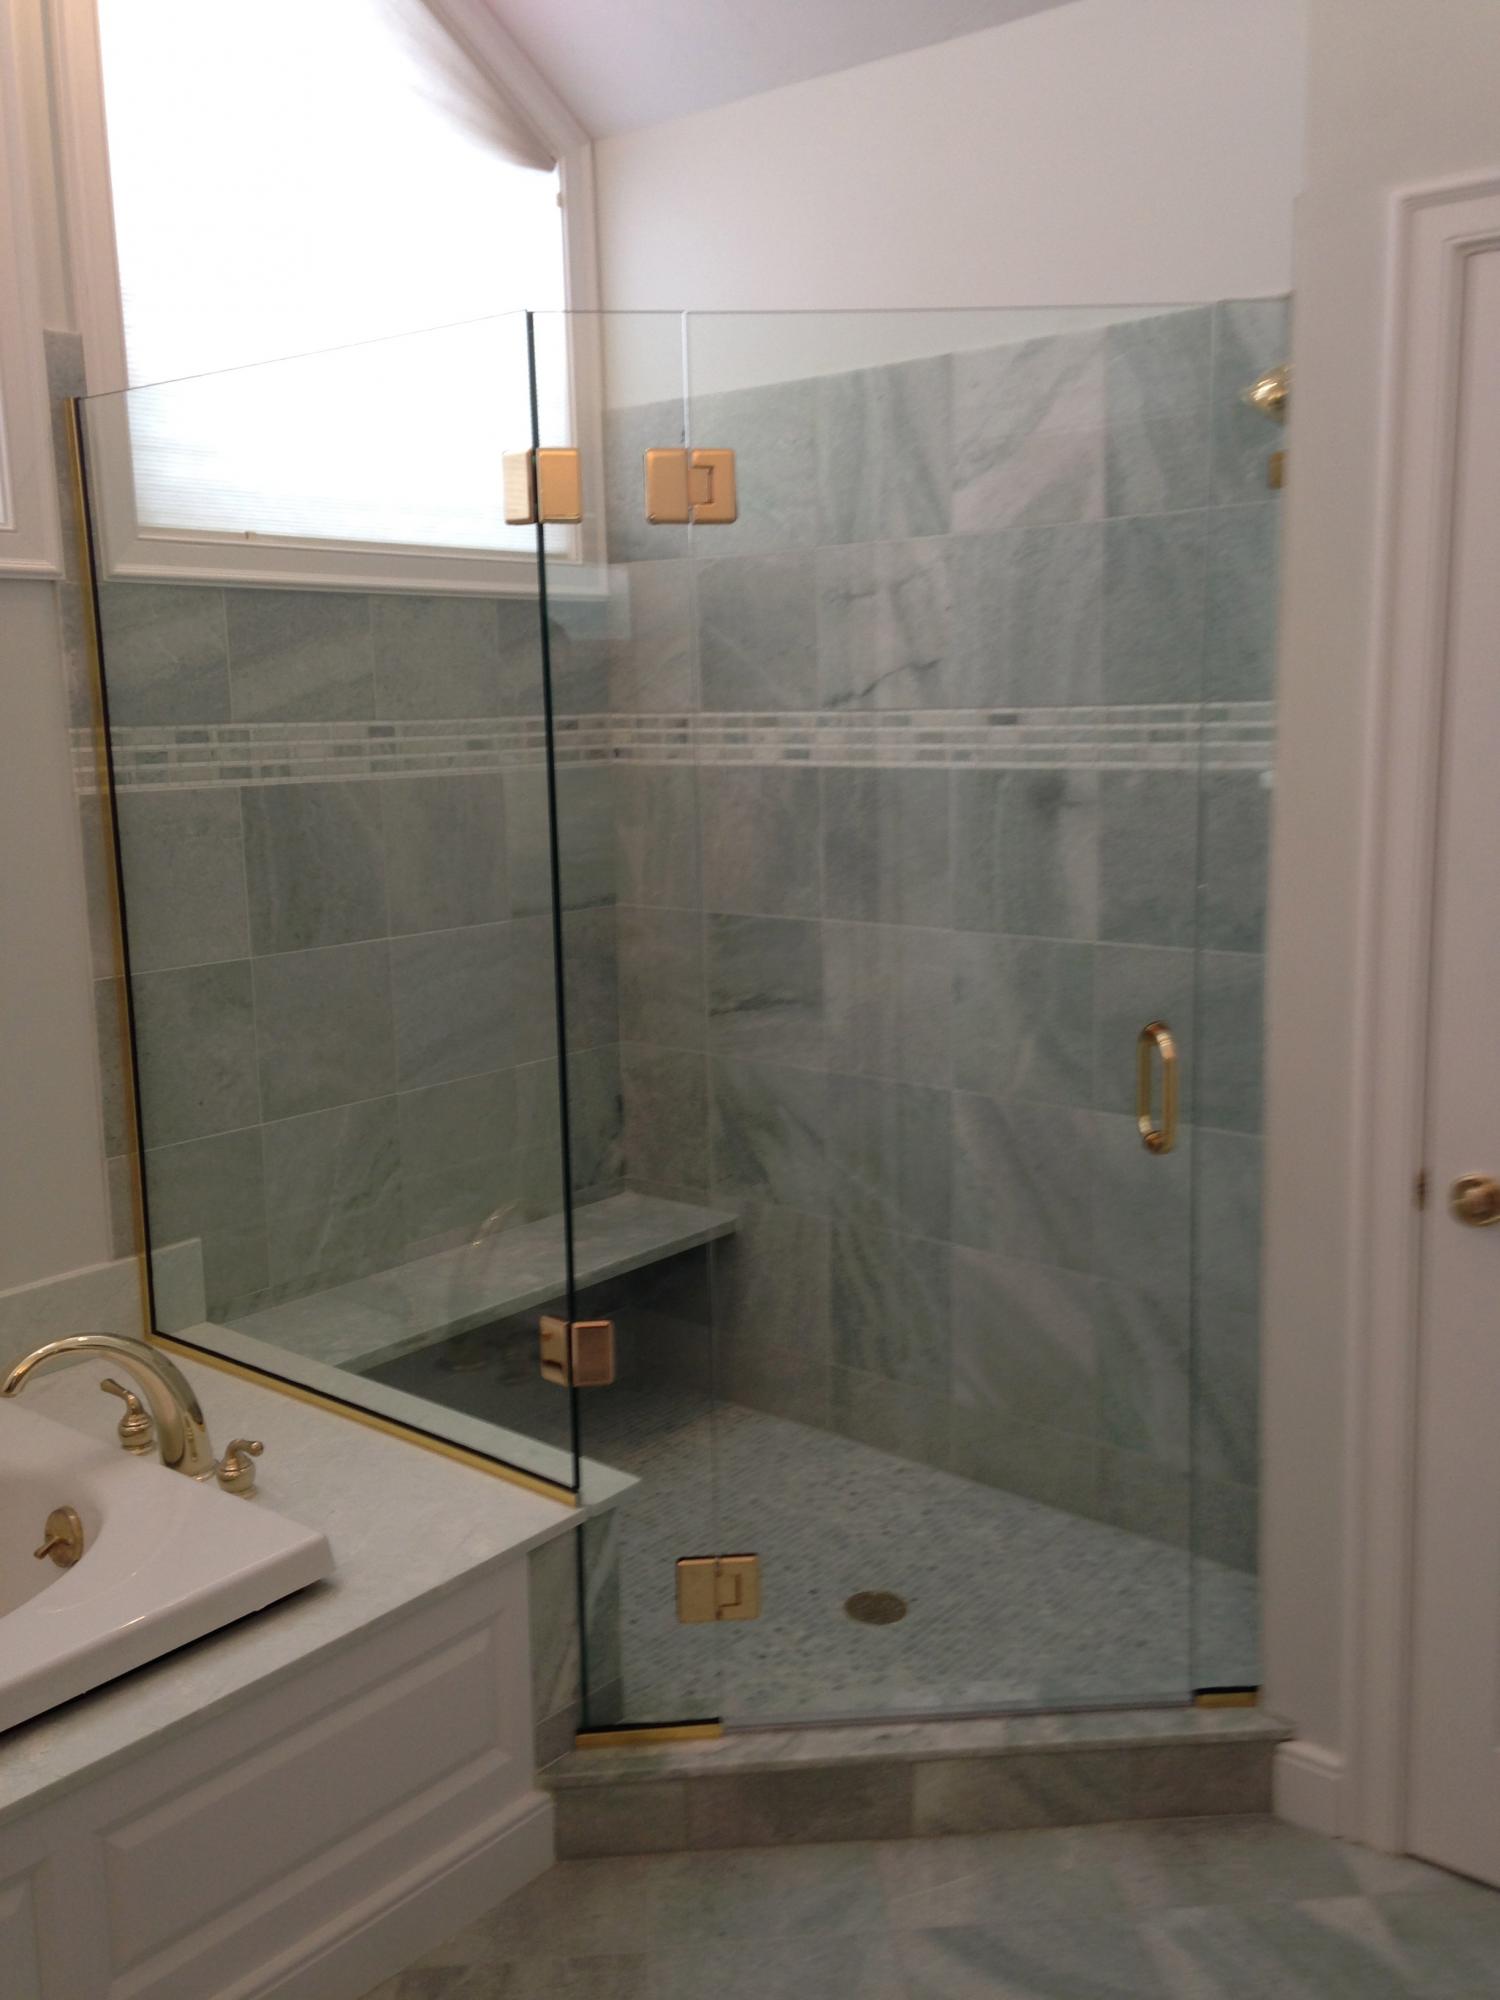 Bathroom remodel, we replaced the tile, rebuilt structure where needed and painted walls and wood work (shower door installed by Grow Glass Co.)